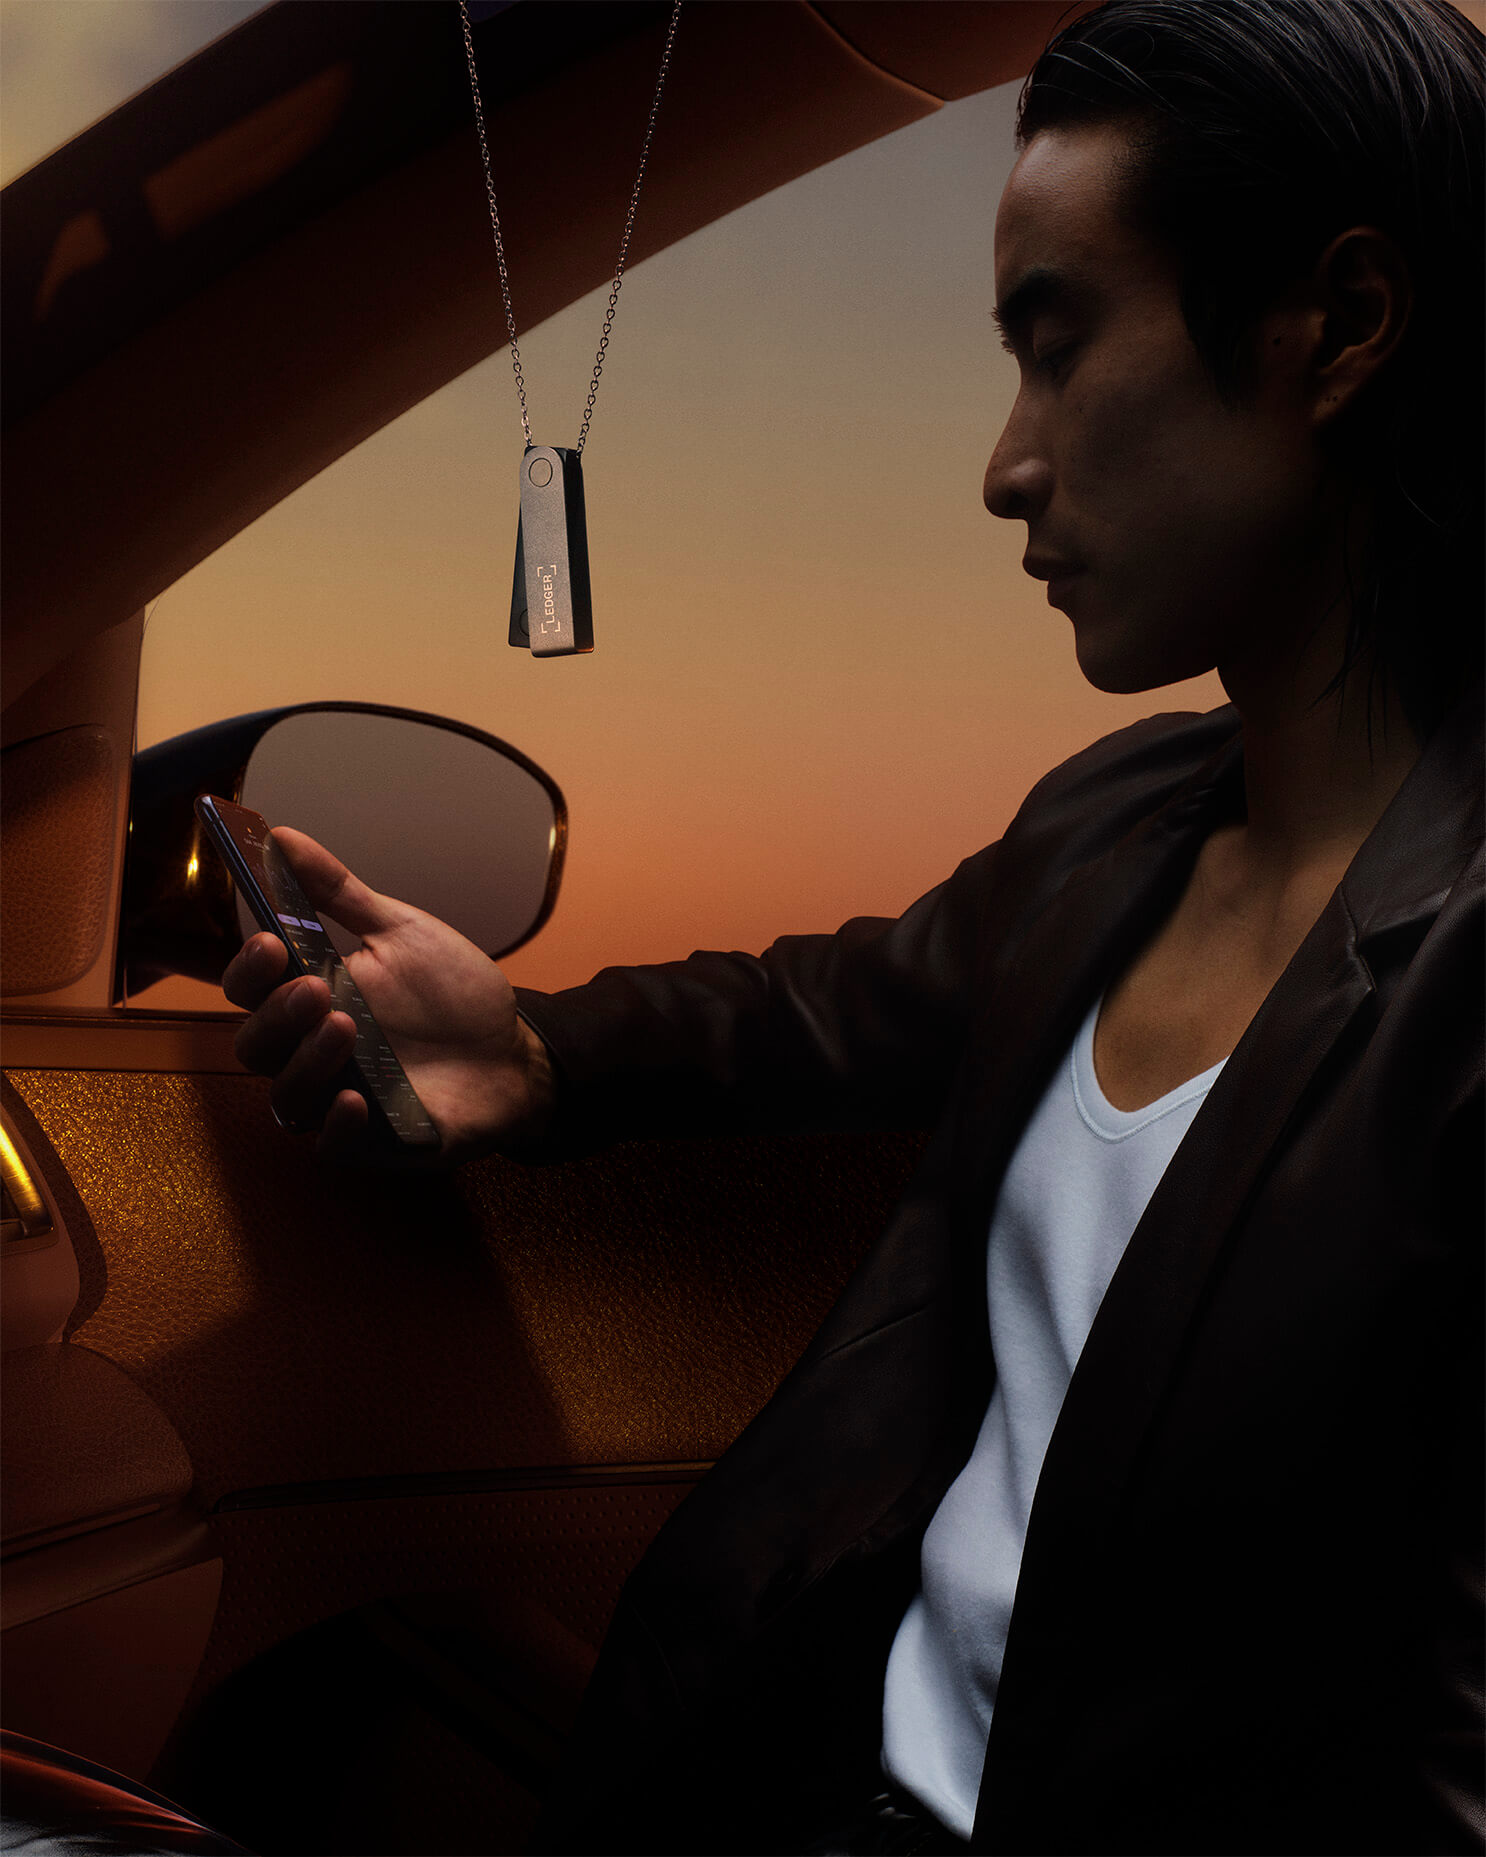 Image of a person in a car with a Ledger Device hanging from the ceiling